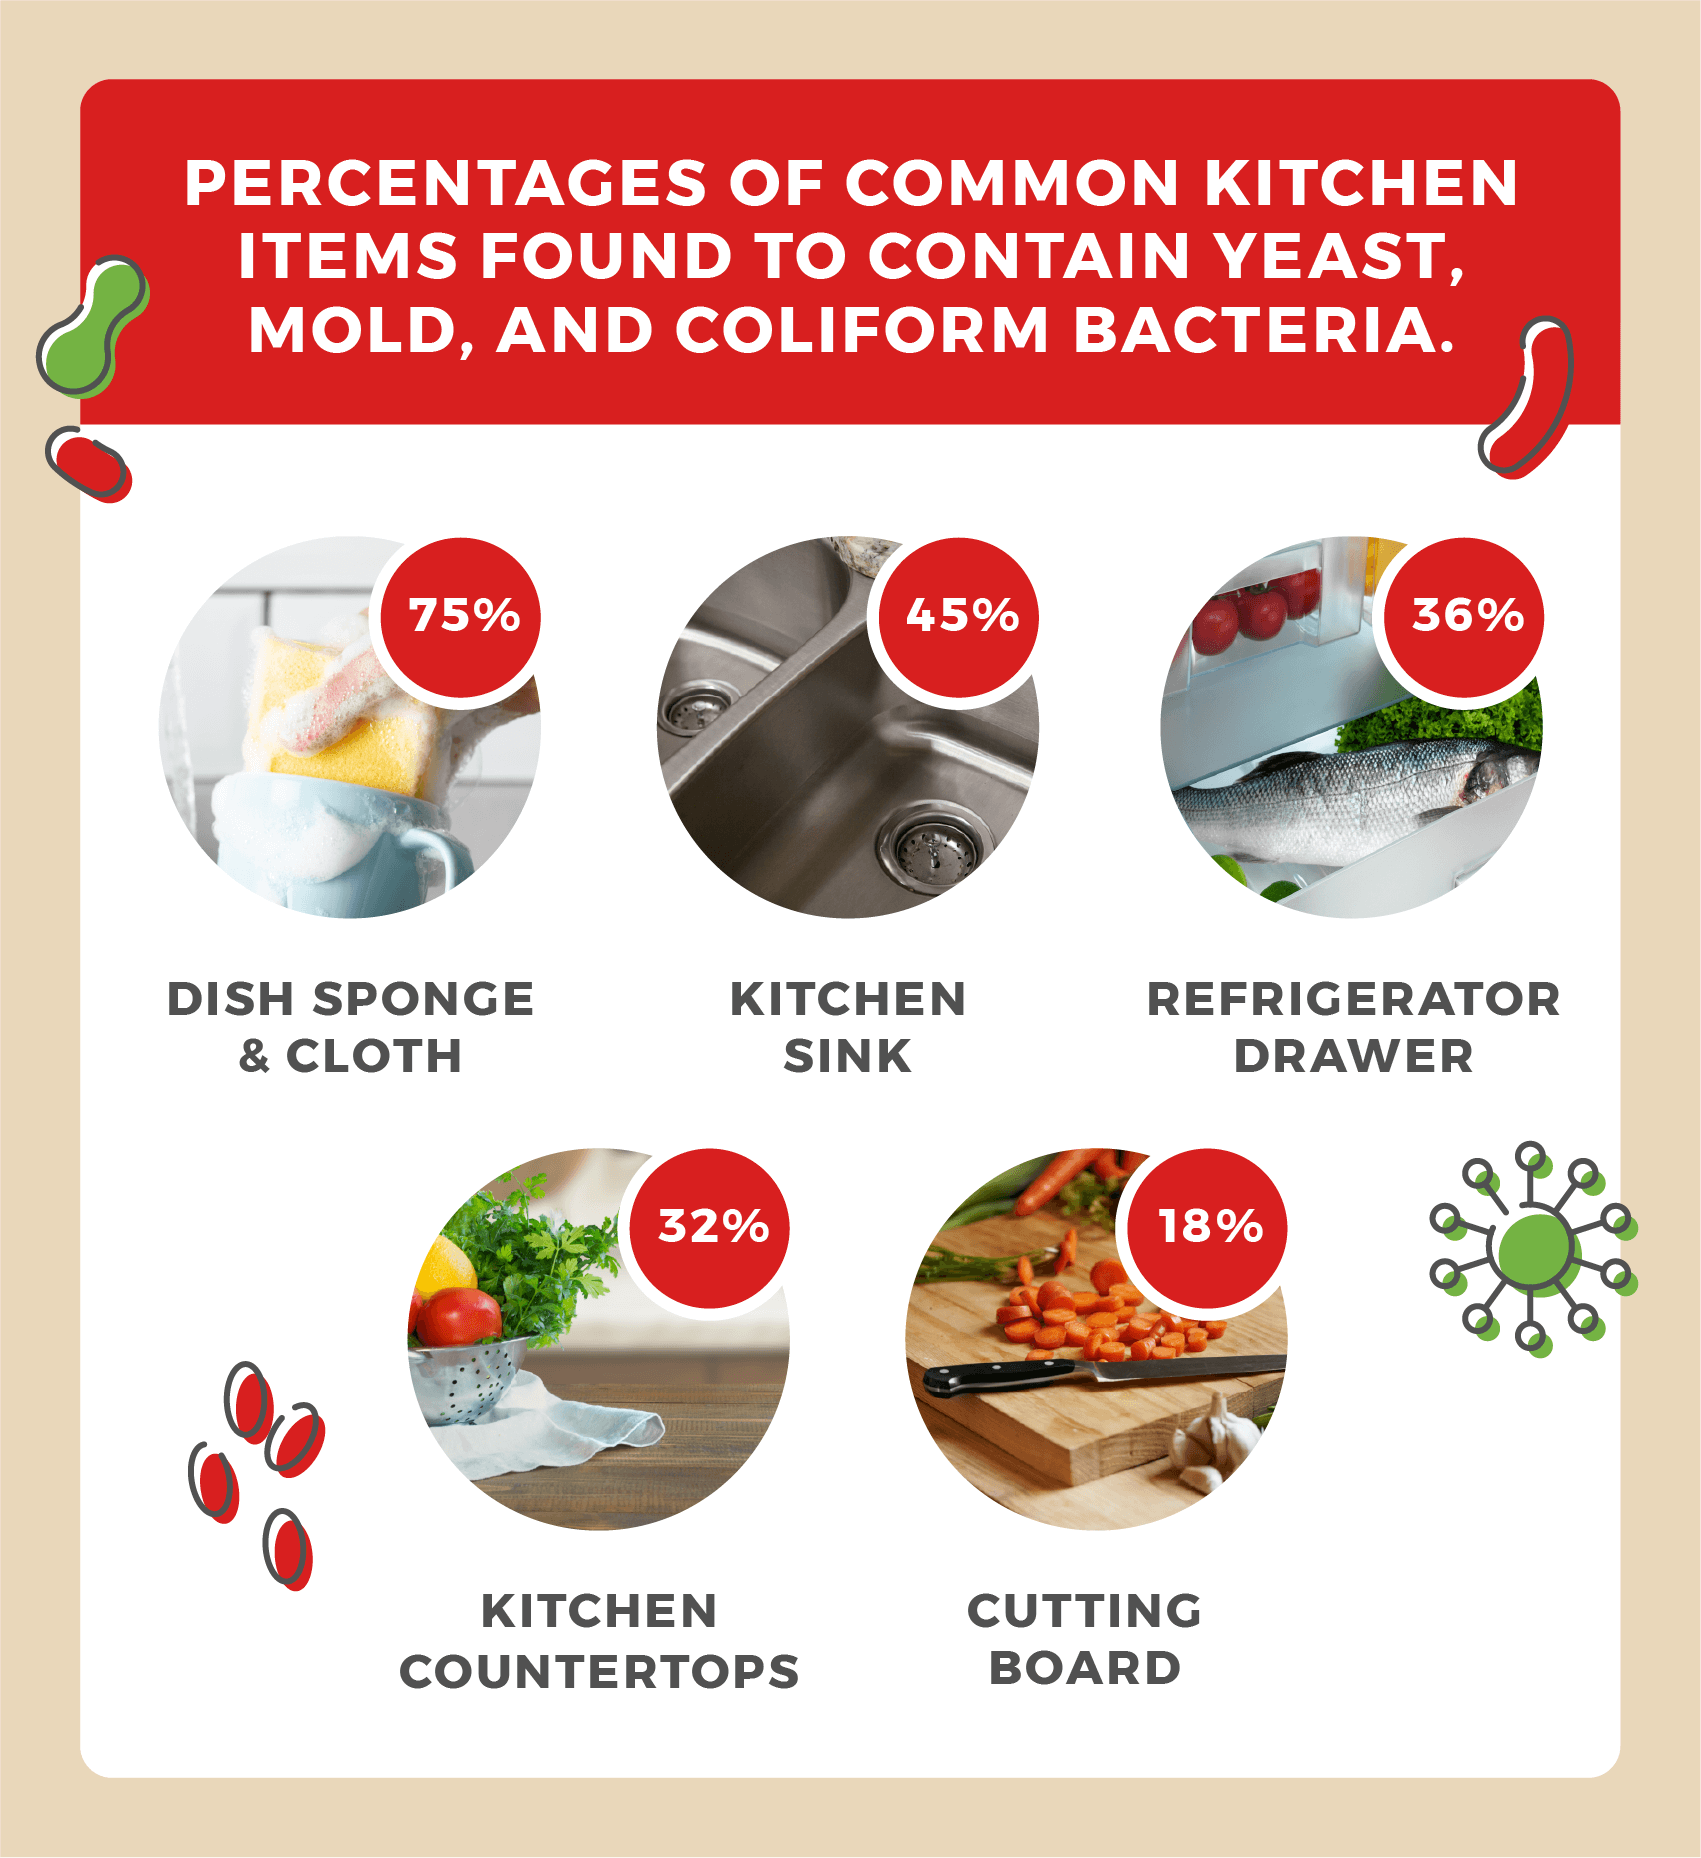 Dish sponges, the kitchen sink, vegetable drawers, countertops and cutting board have been found to contain coliform bacteria.